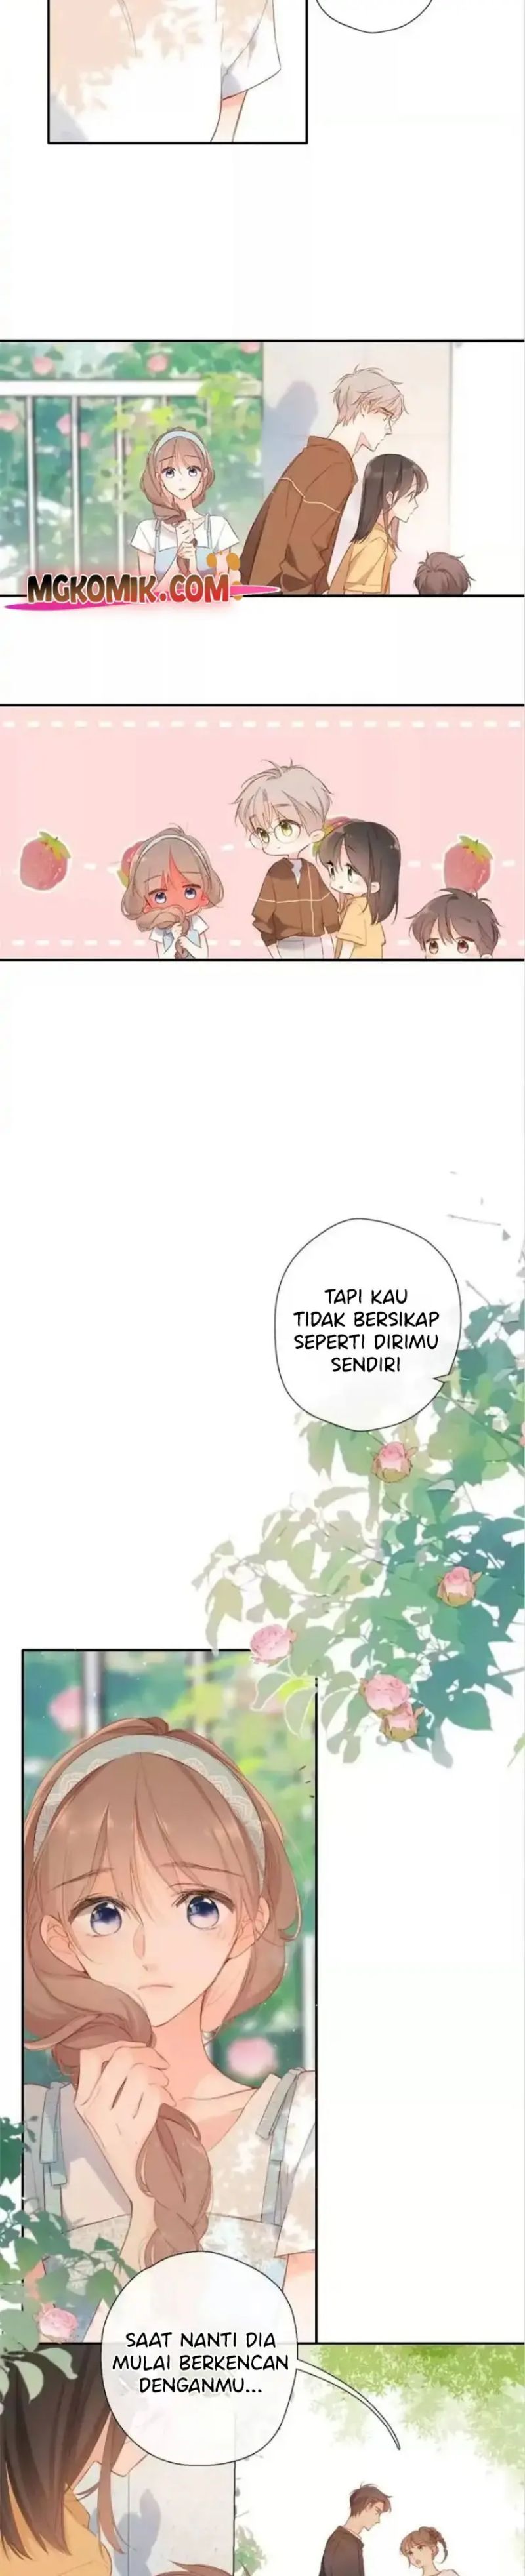 Once More Chapter 142 - 127